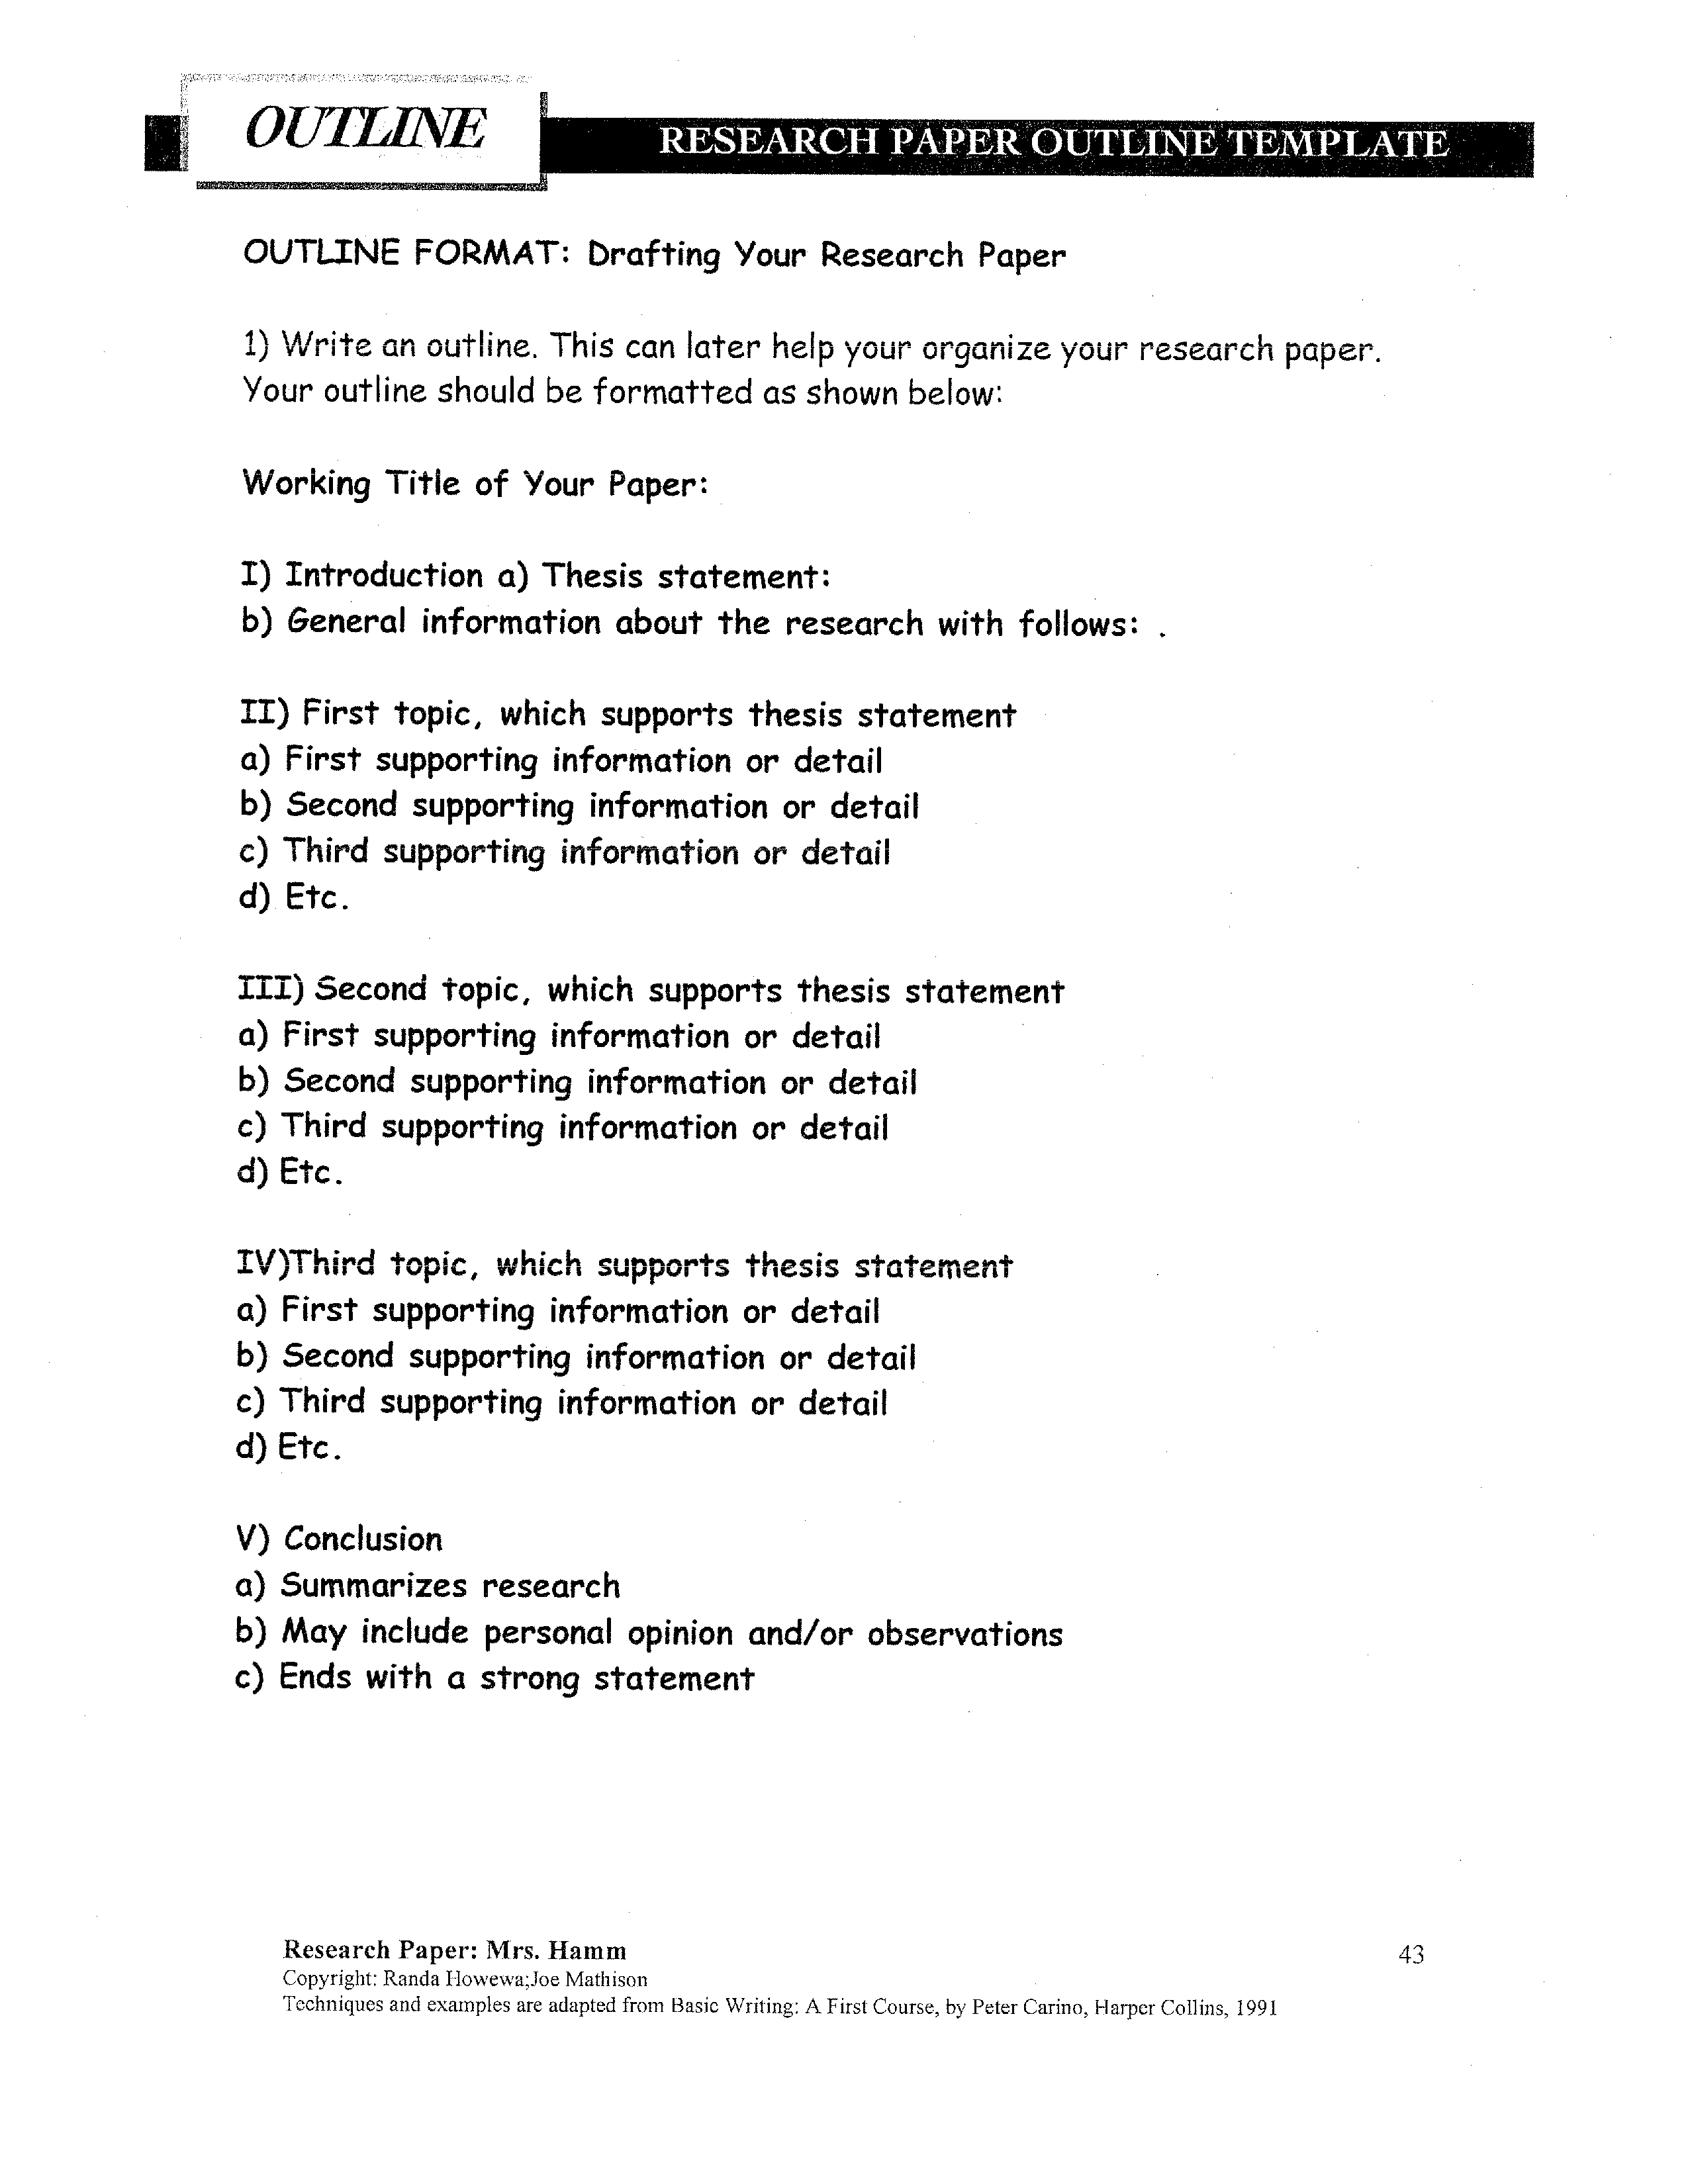 sample outline format for research paper